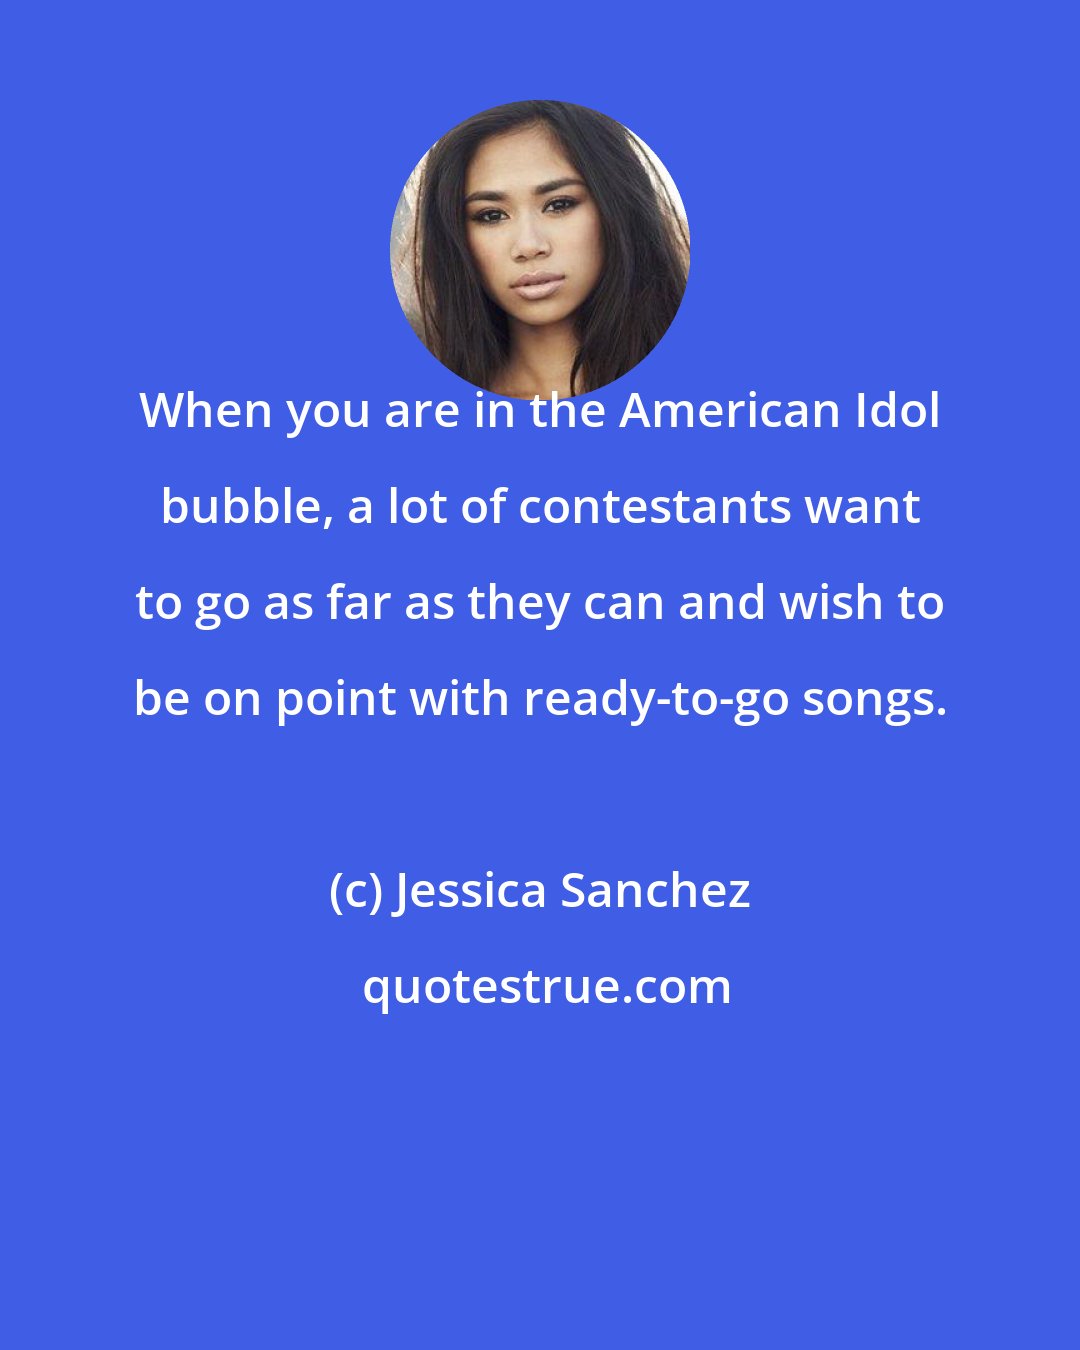 Jessica Sanchez: When you are in the American Idol bubble, a lot of contestants want to go as far as they can and wish to be on point with ready-to-go songs.